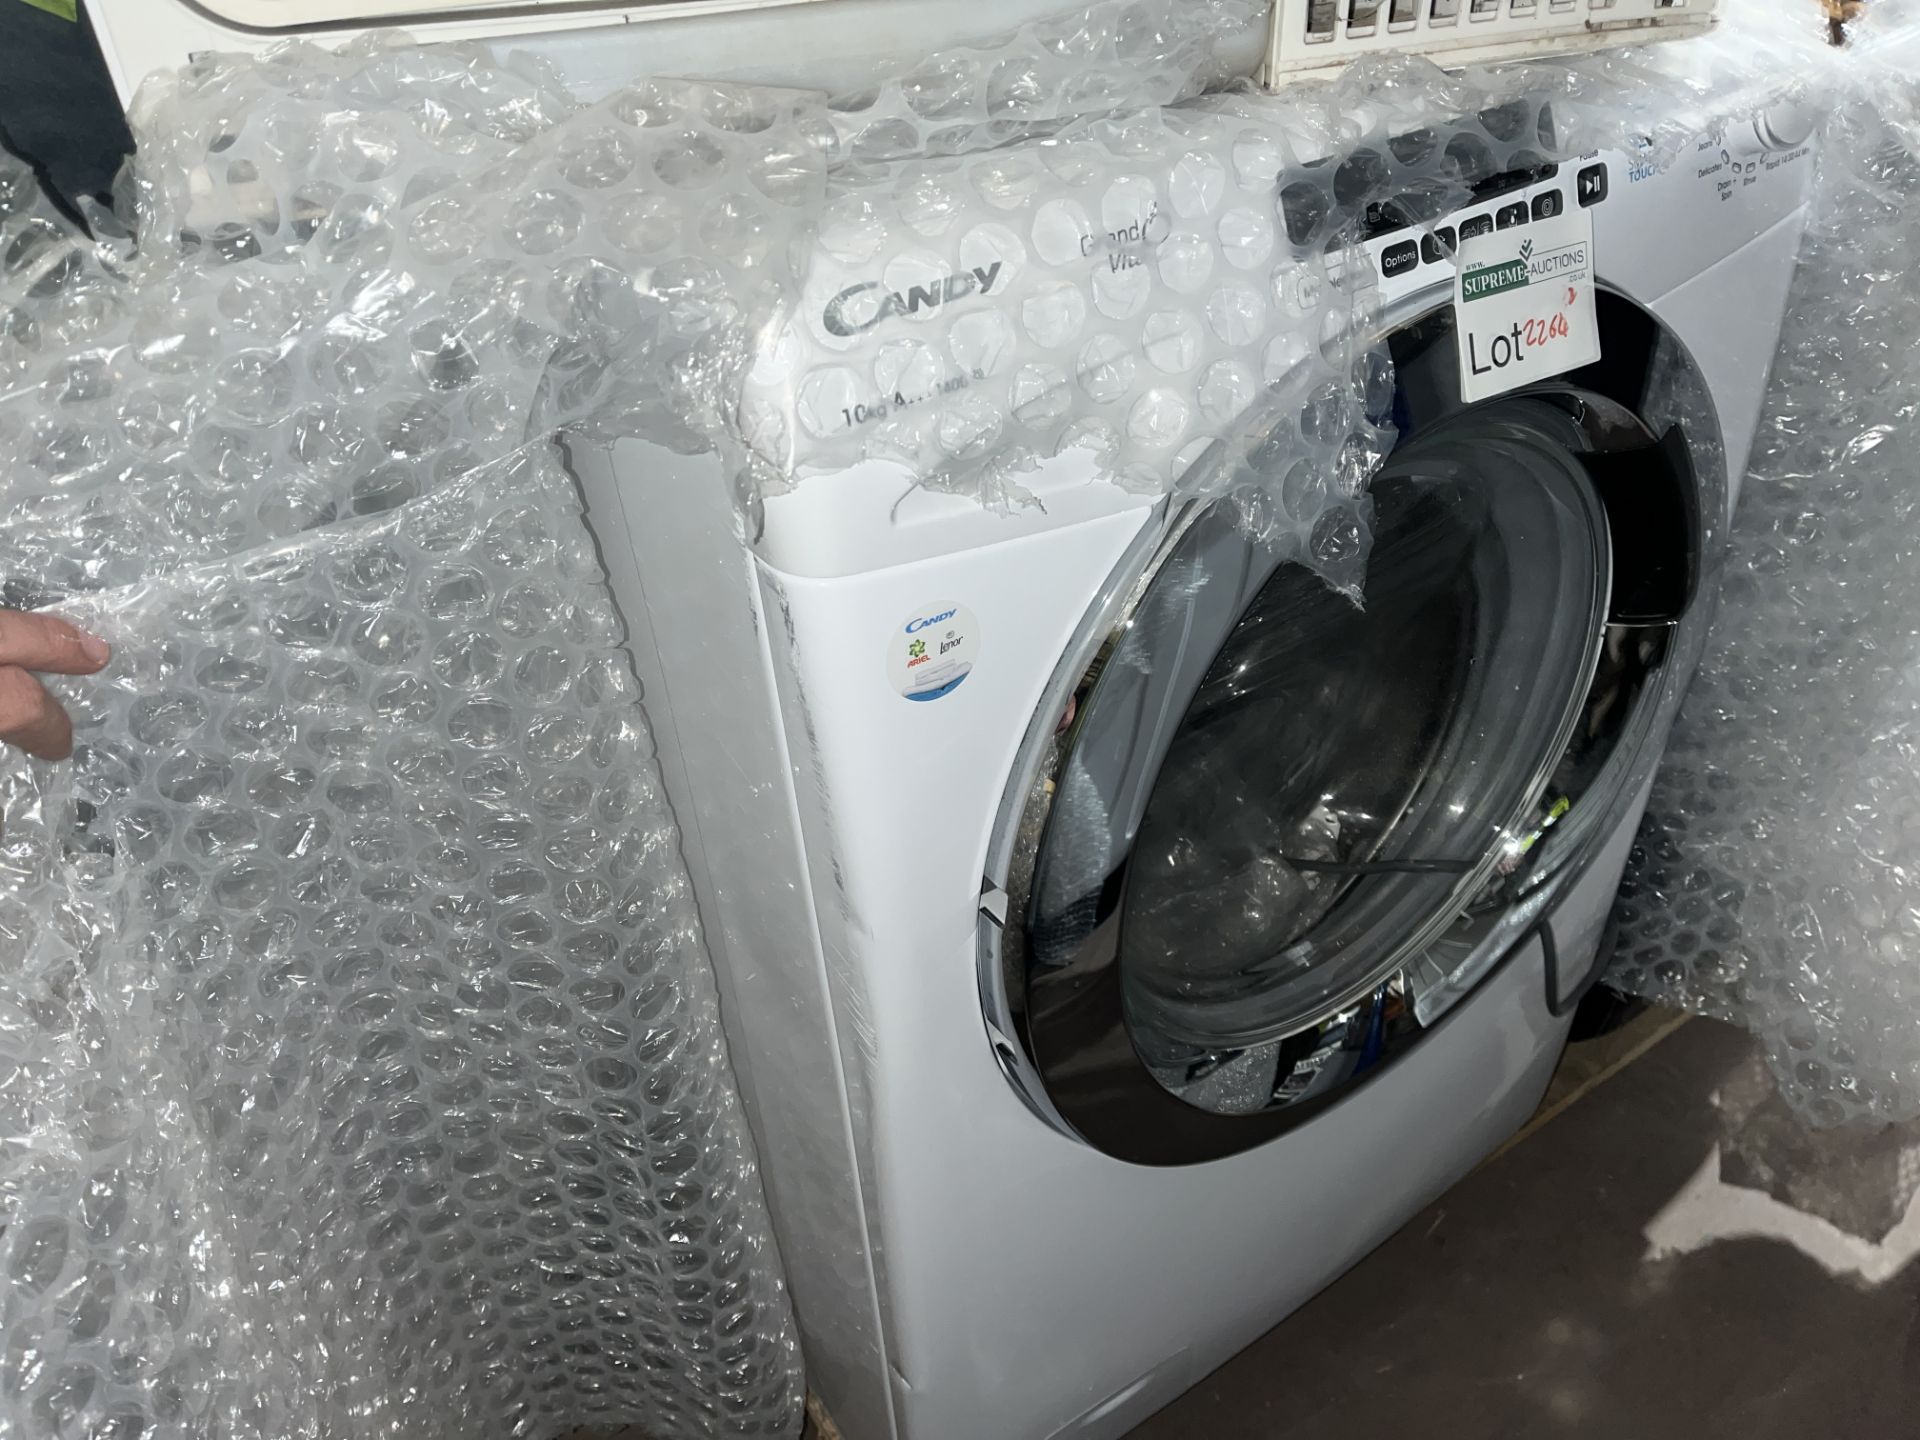 RETURNED CANDY SMART TOUCH WASHING MACHINE R9-12